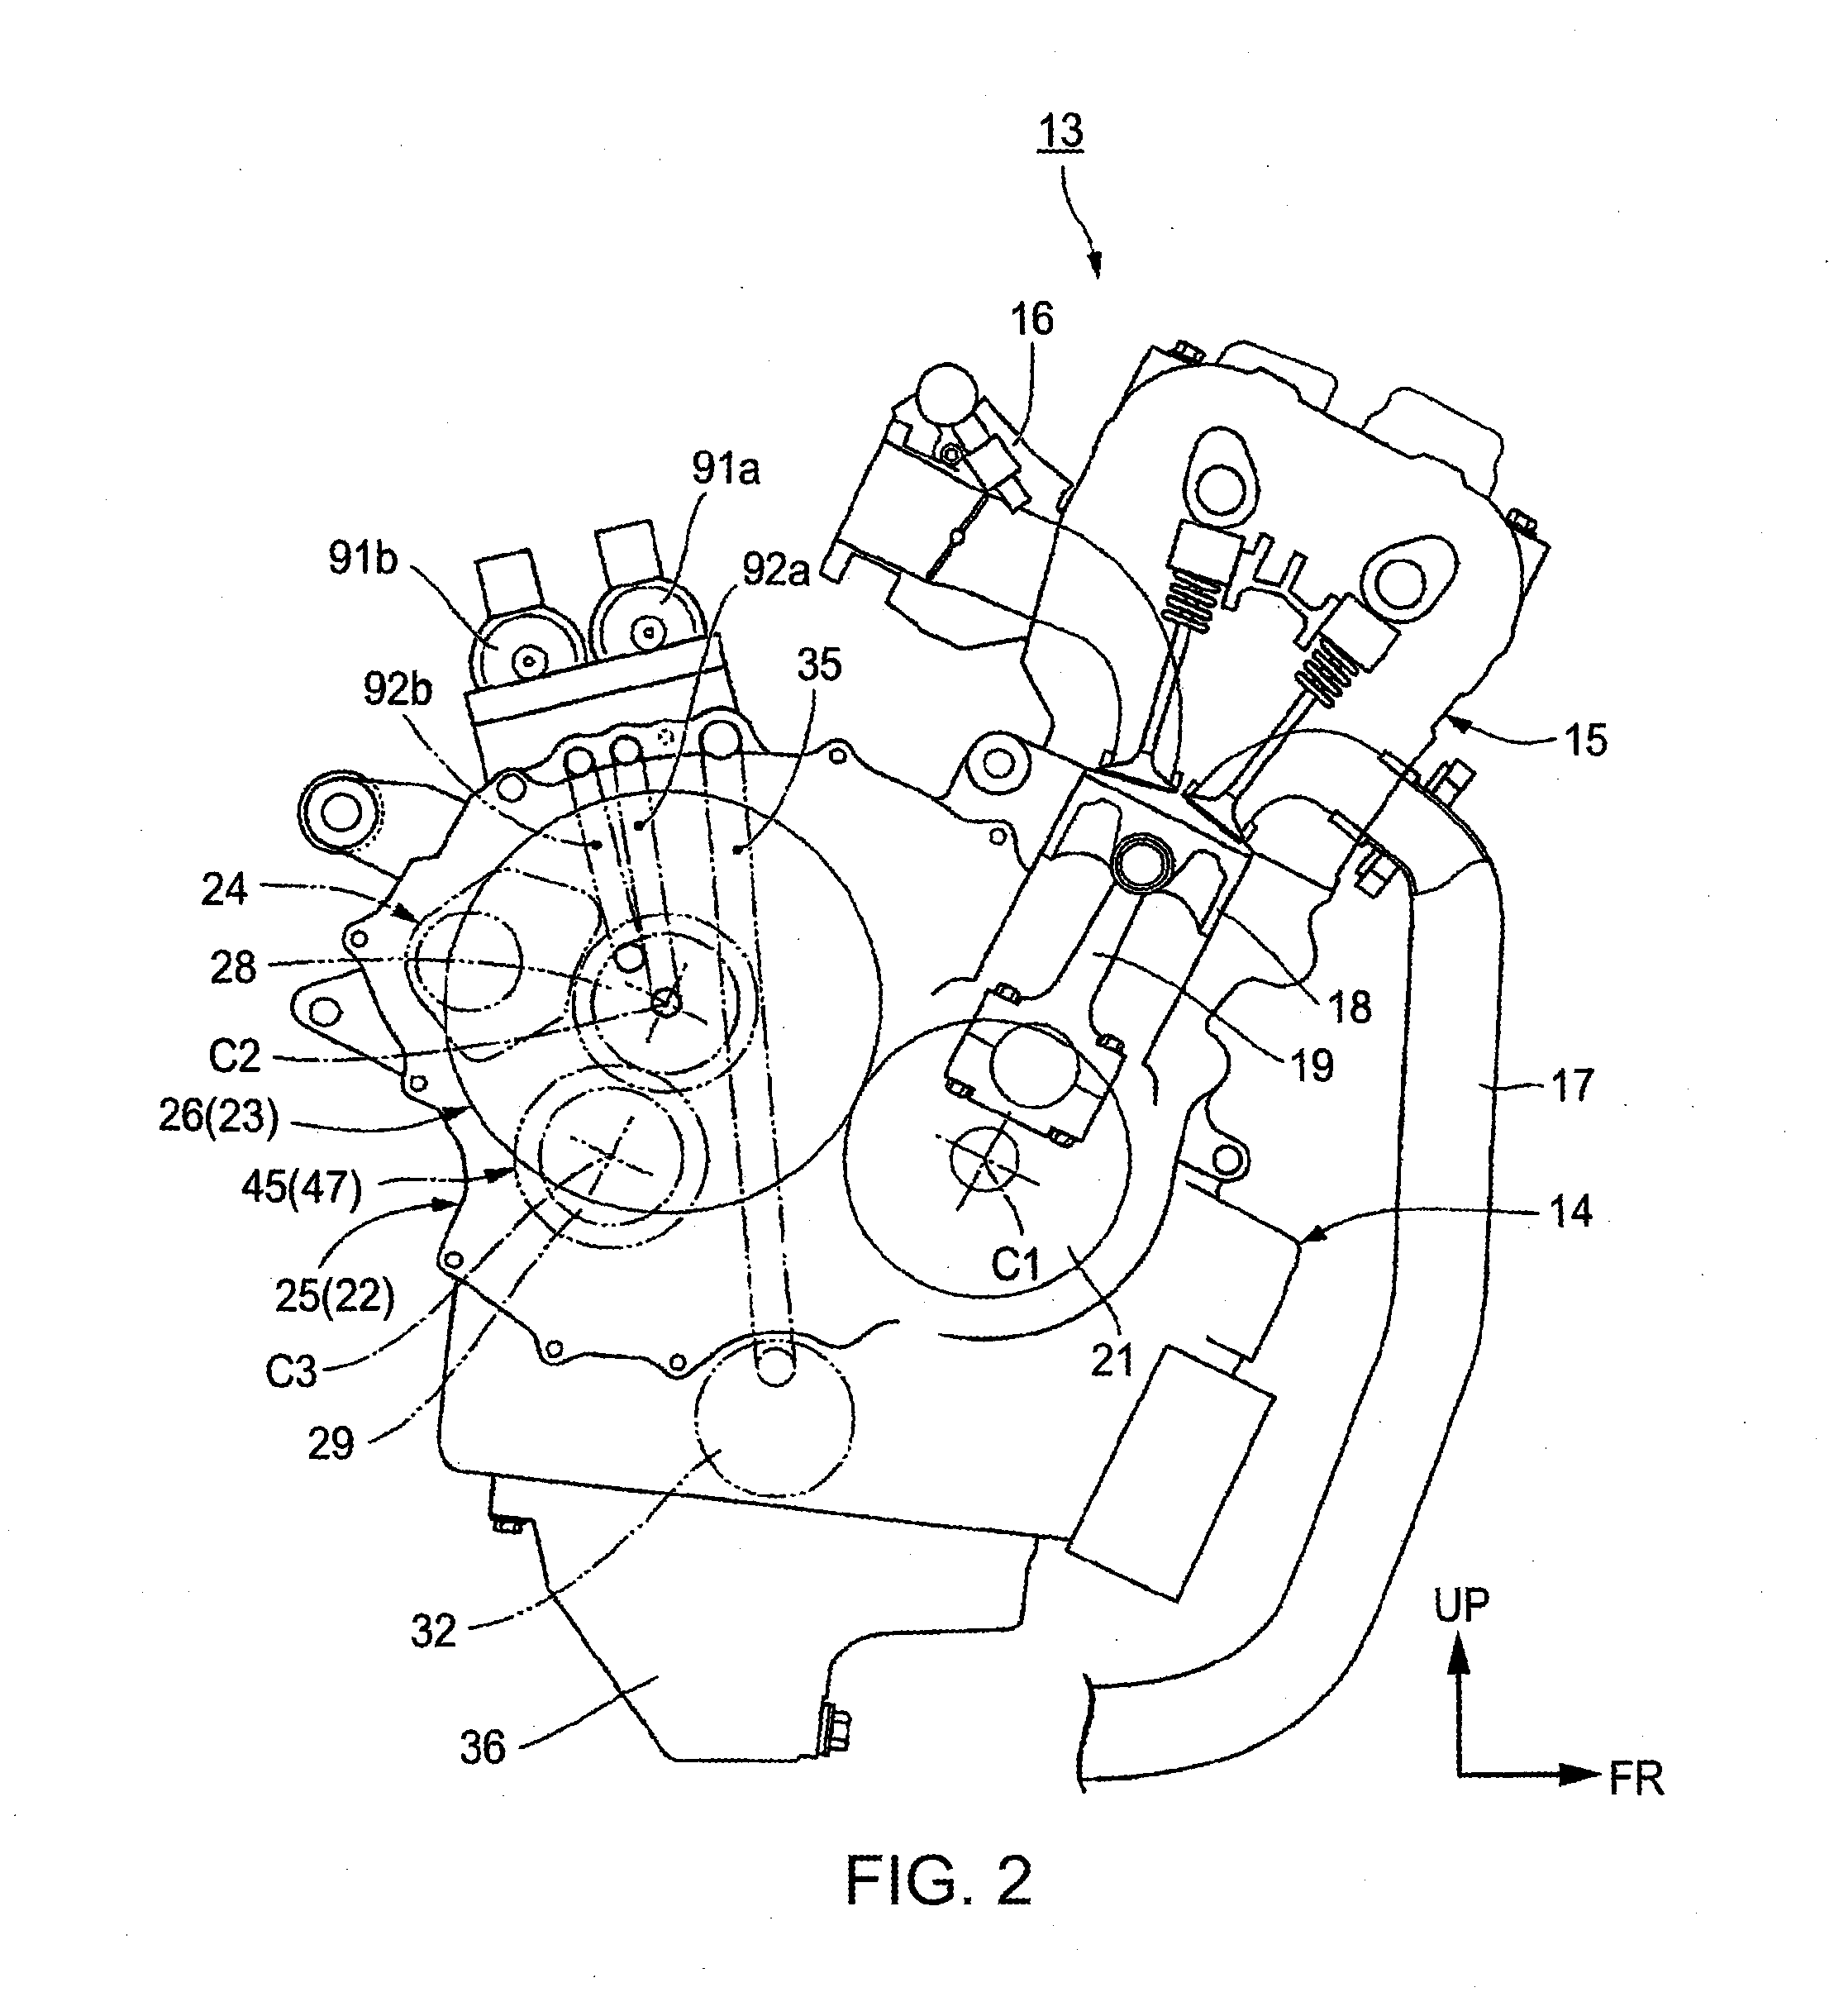 Speed change controlling apparatus for motorcycle